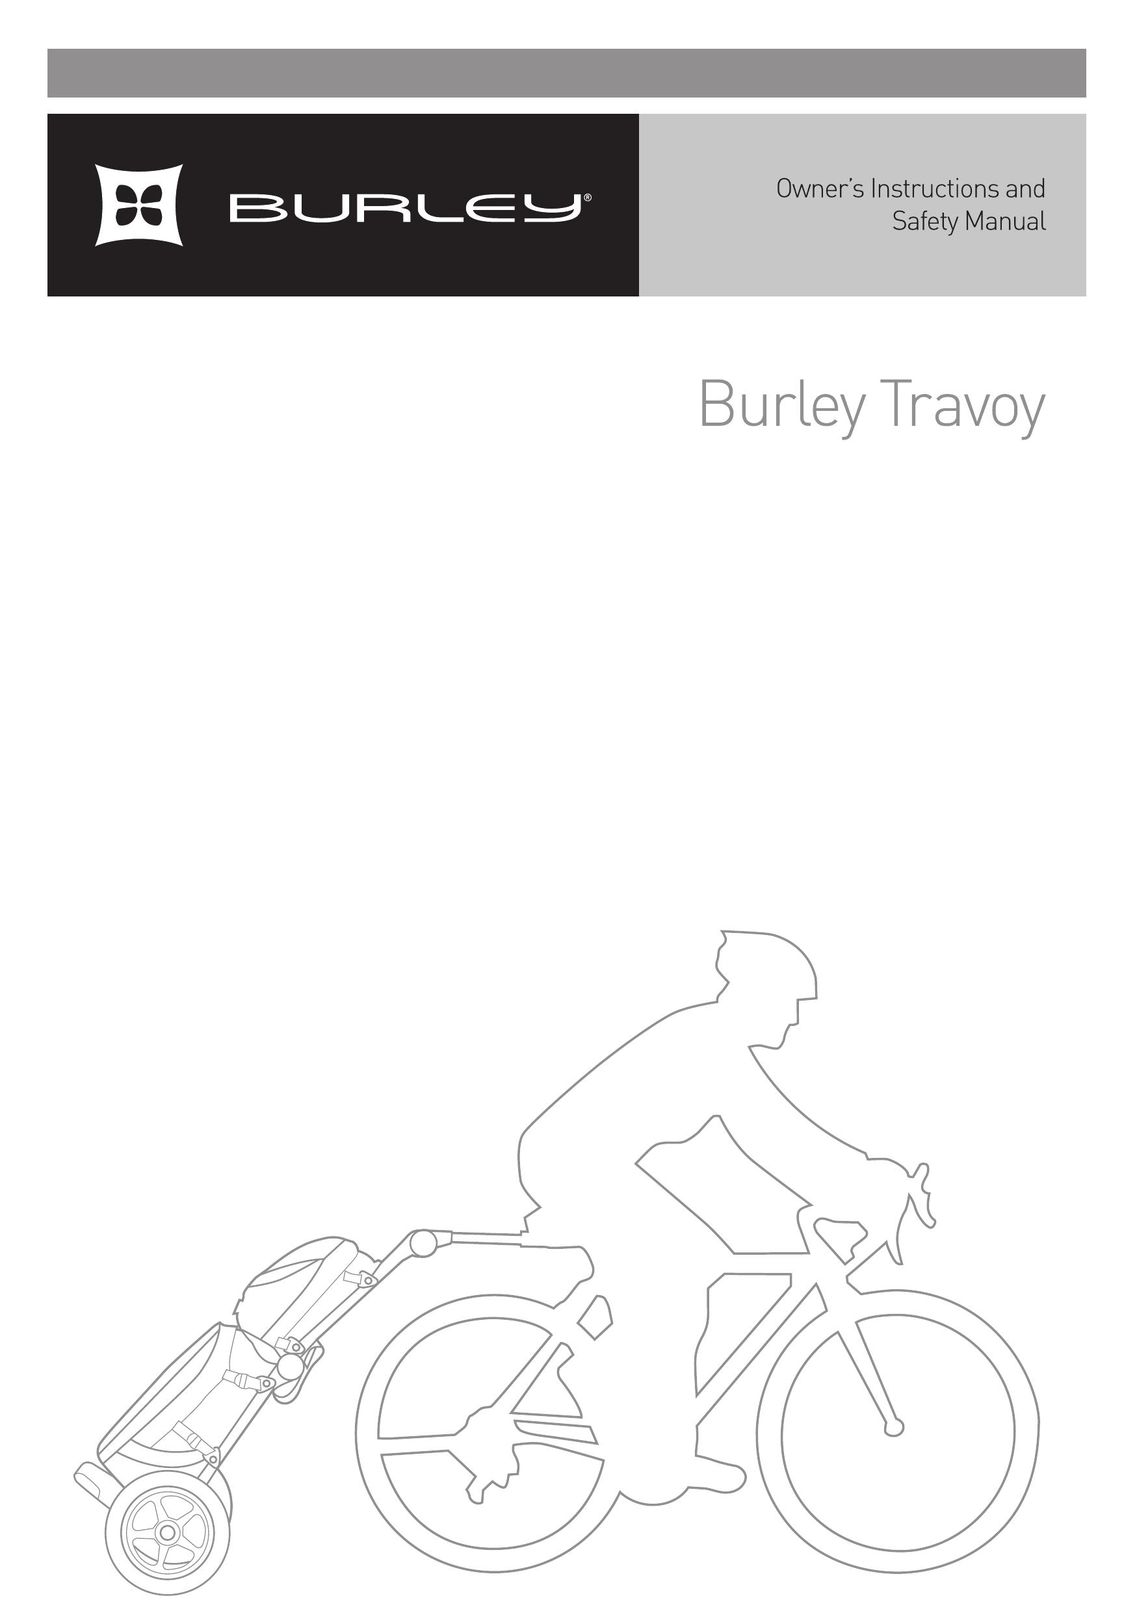 Burley SBC TT900 Bicycle Accessories User Manual (Page 1)